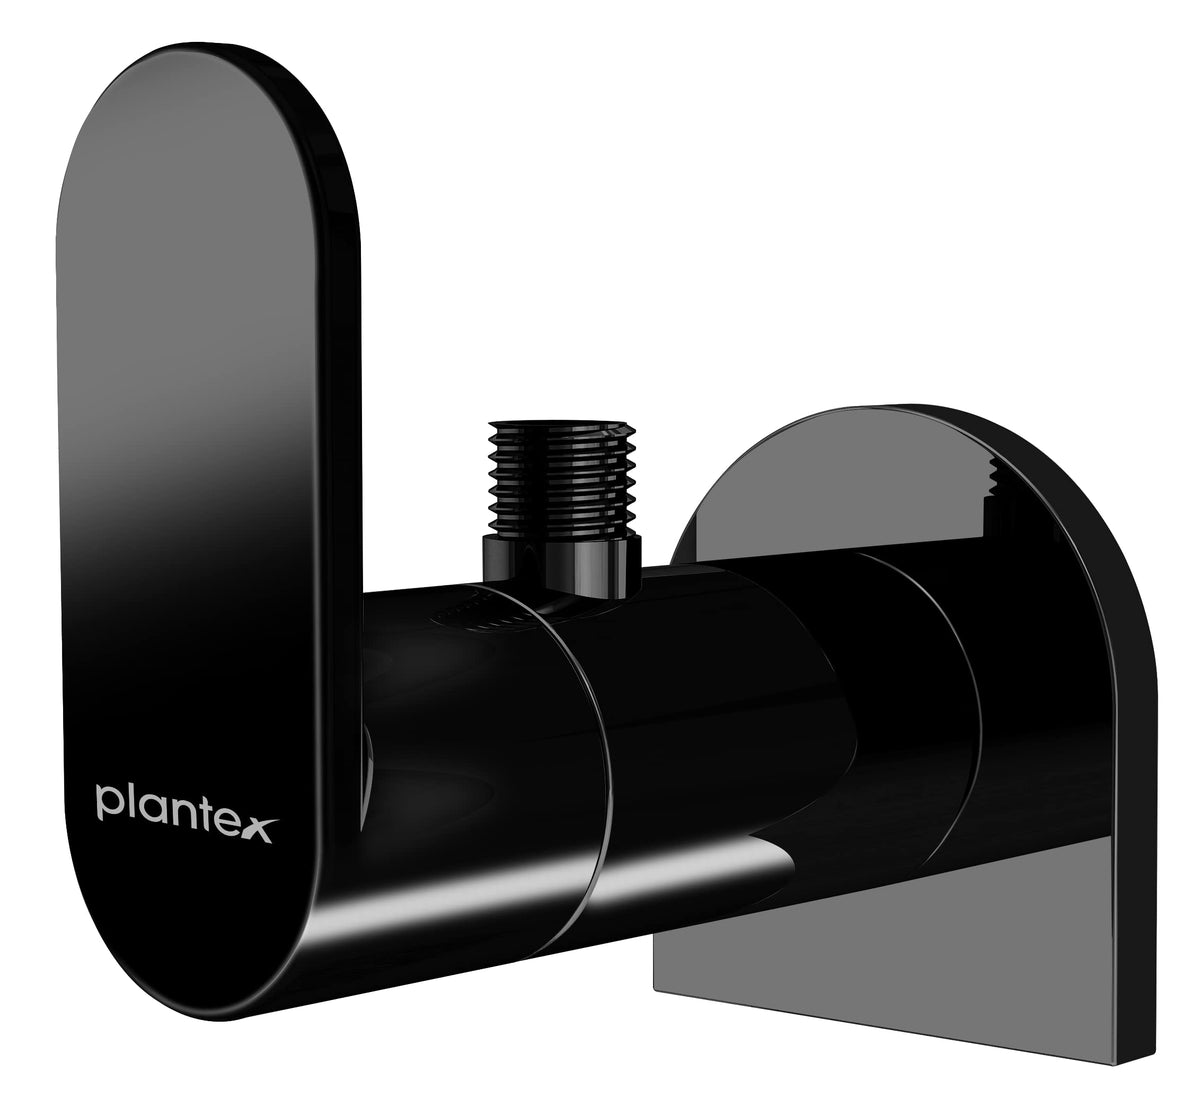 Plantex ORN-205 Pure Brass Angular Valve for Bathroom/Stop Cock for Wash Basin with Brass Wall Flange & Teflon Tape (Black-Glossy Finish)